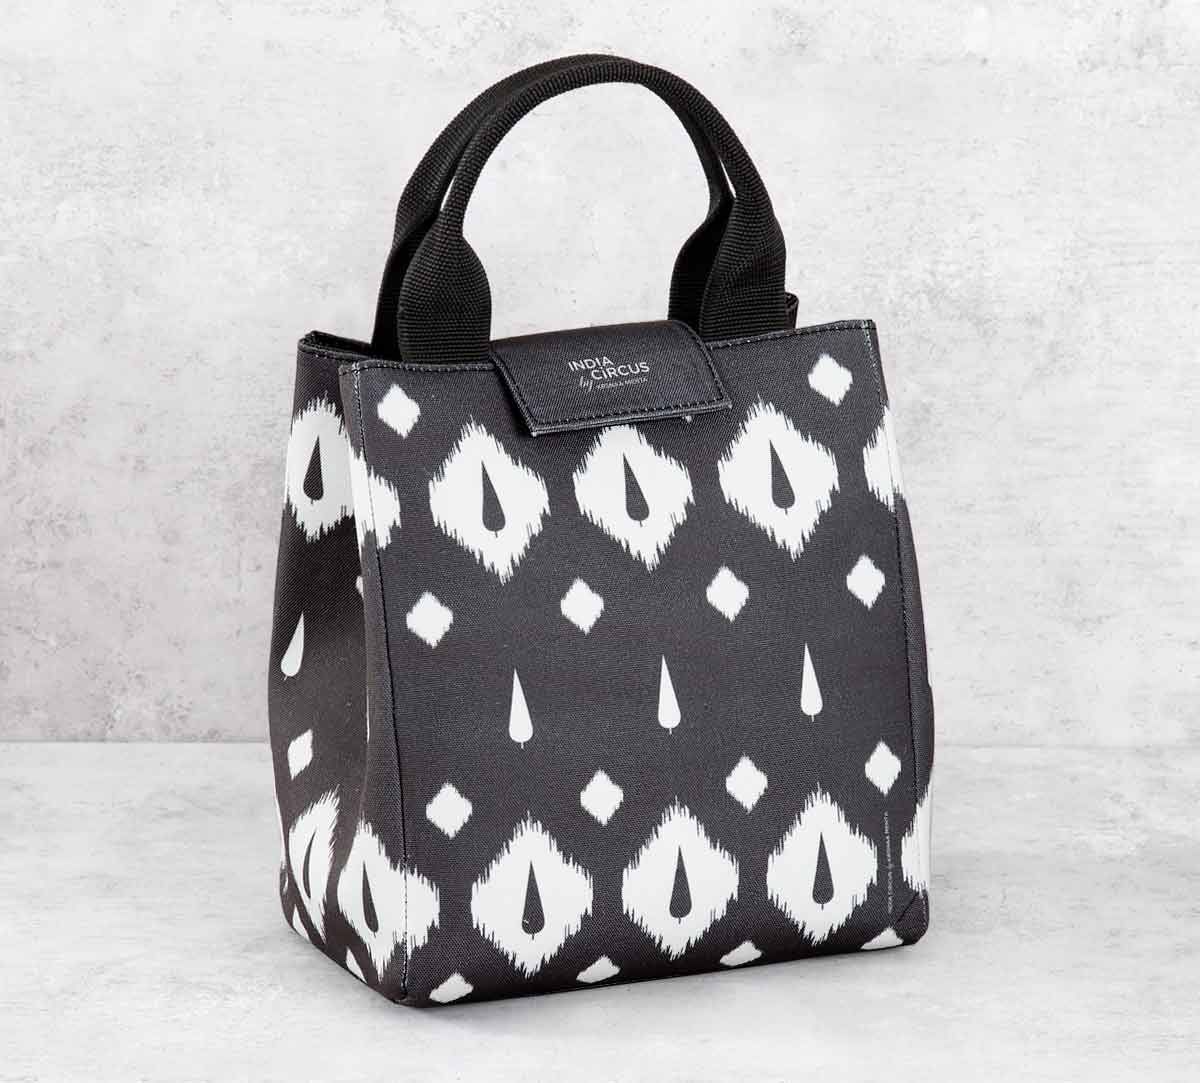 India Circus Conifer Symmetry Lunch Bag